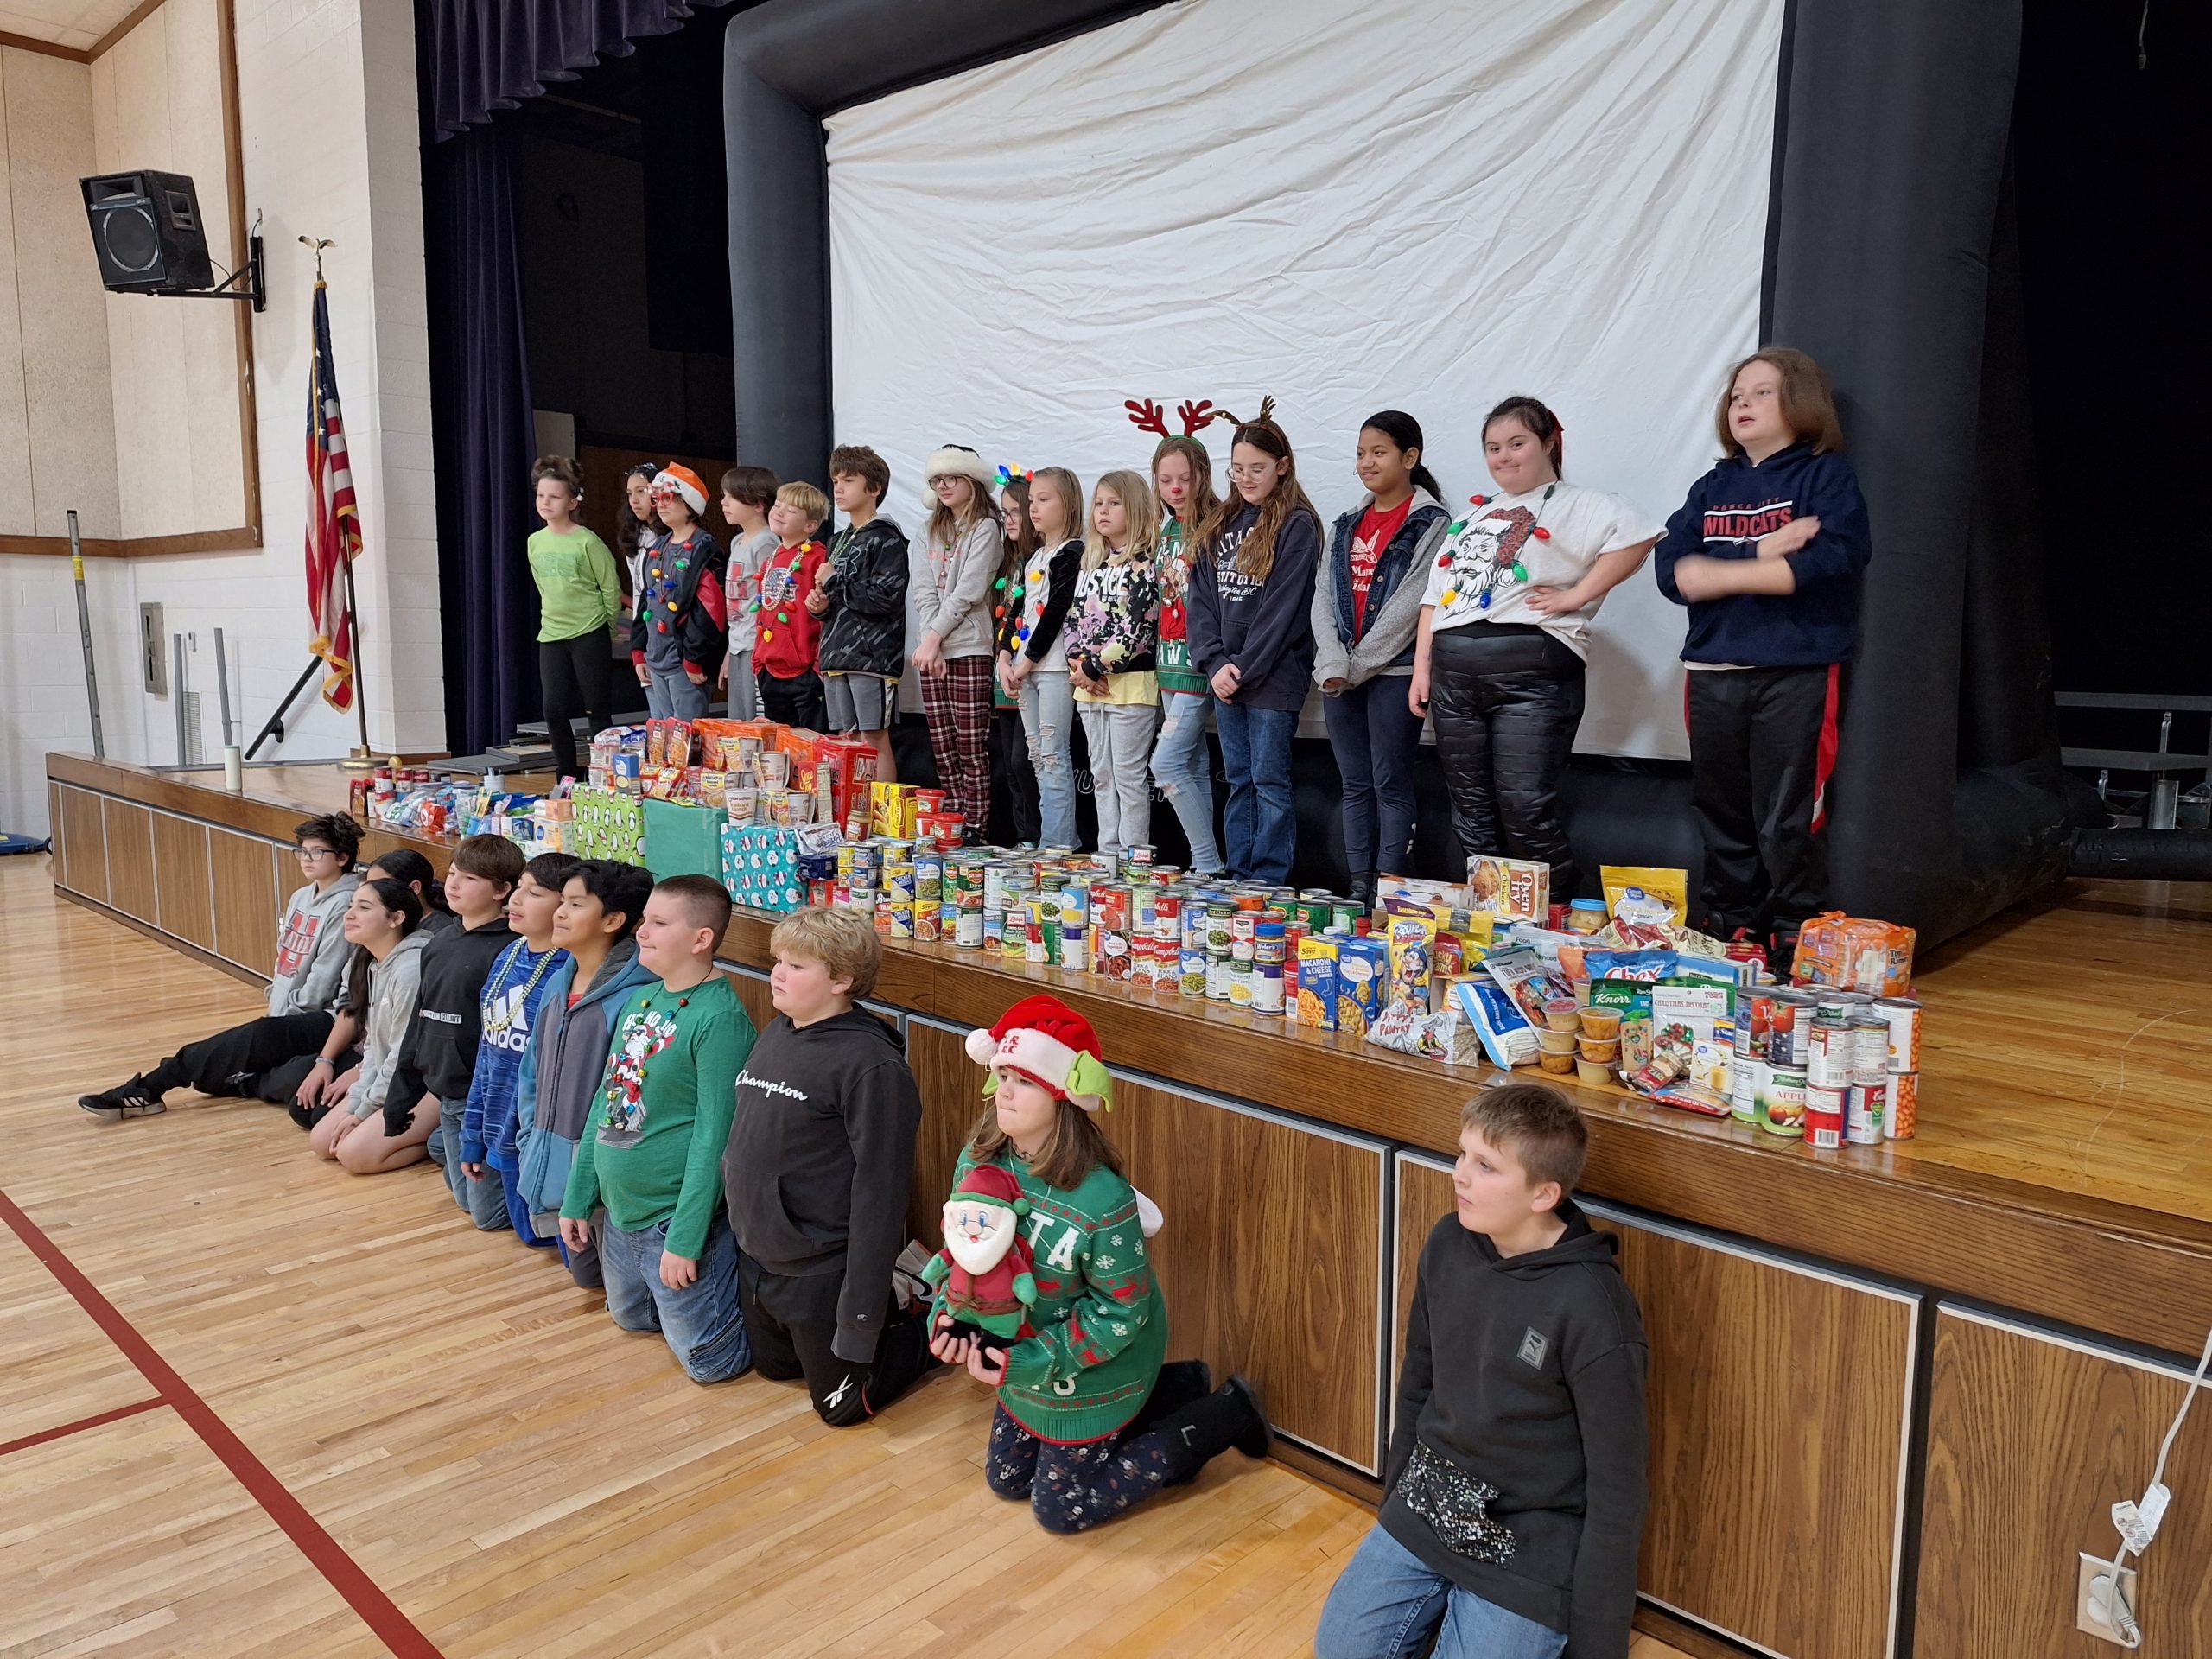 Union Elementary Donates to Blessings Box